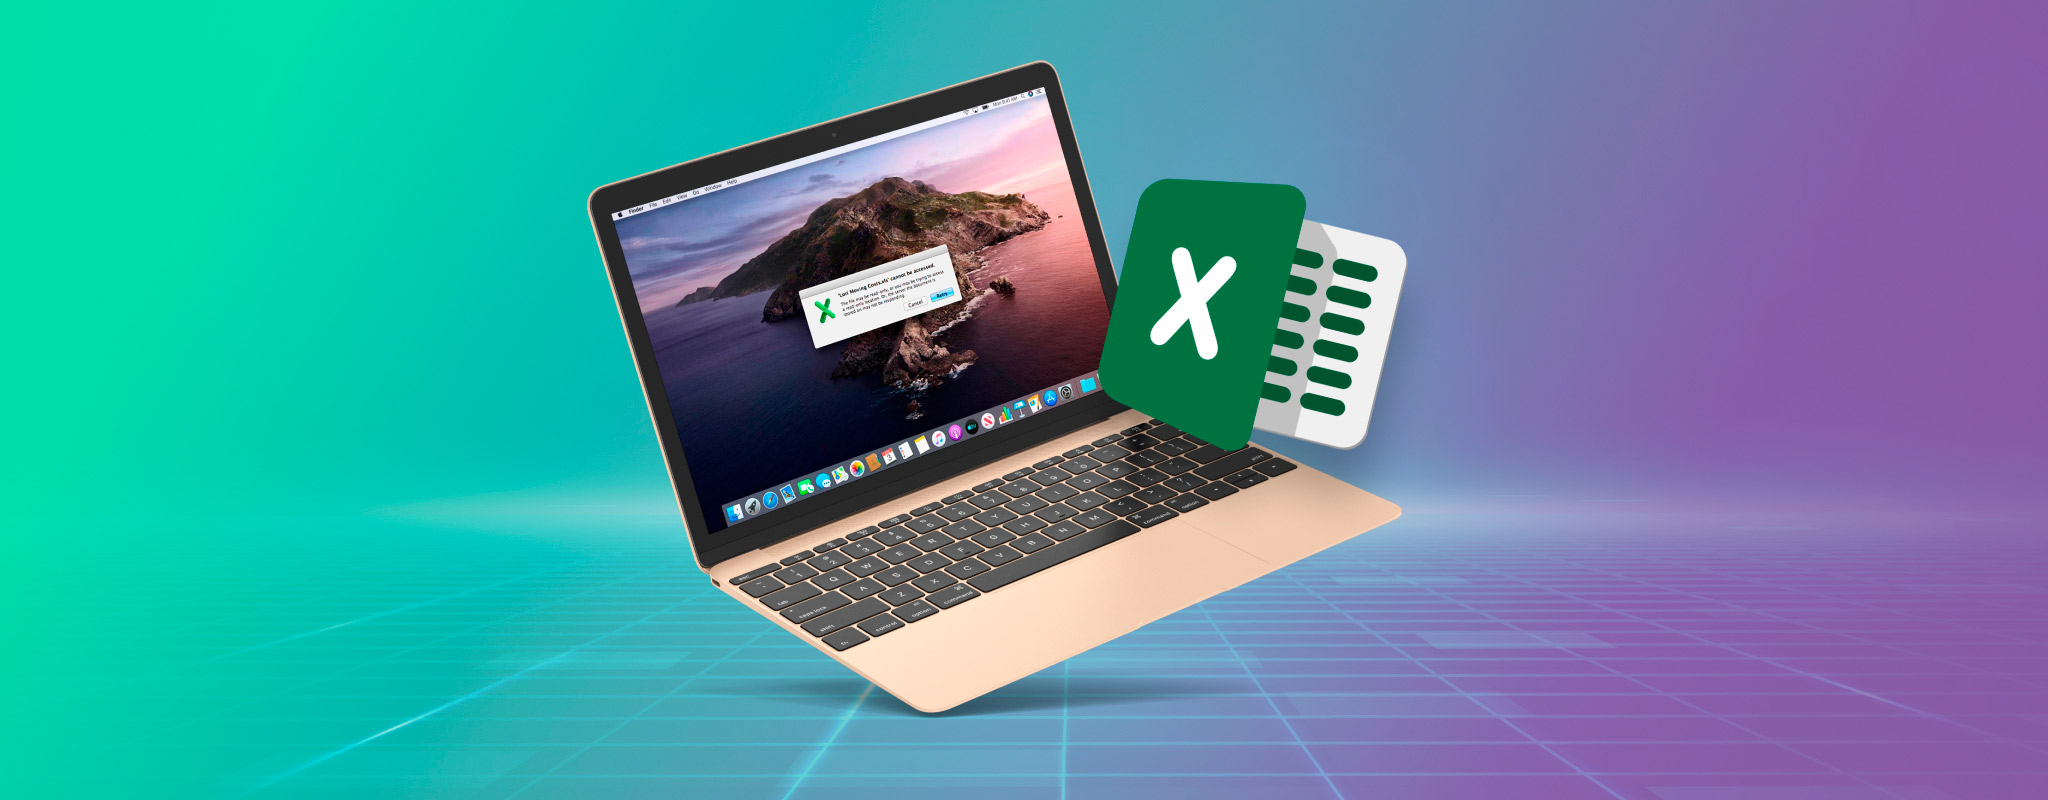 turn off recovey in excel for mac